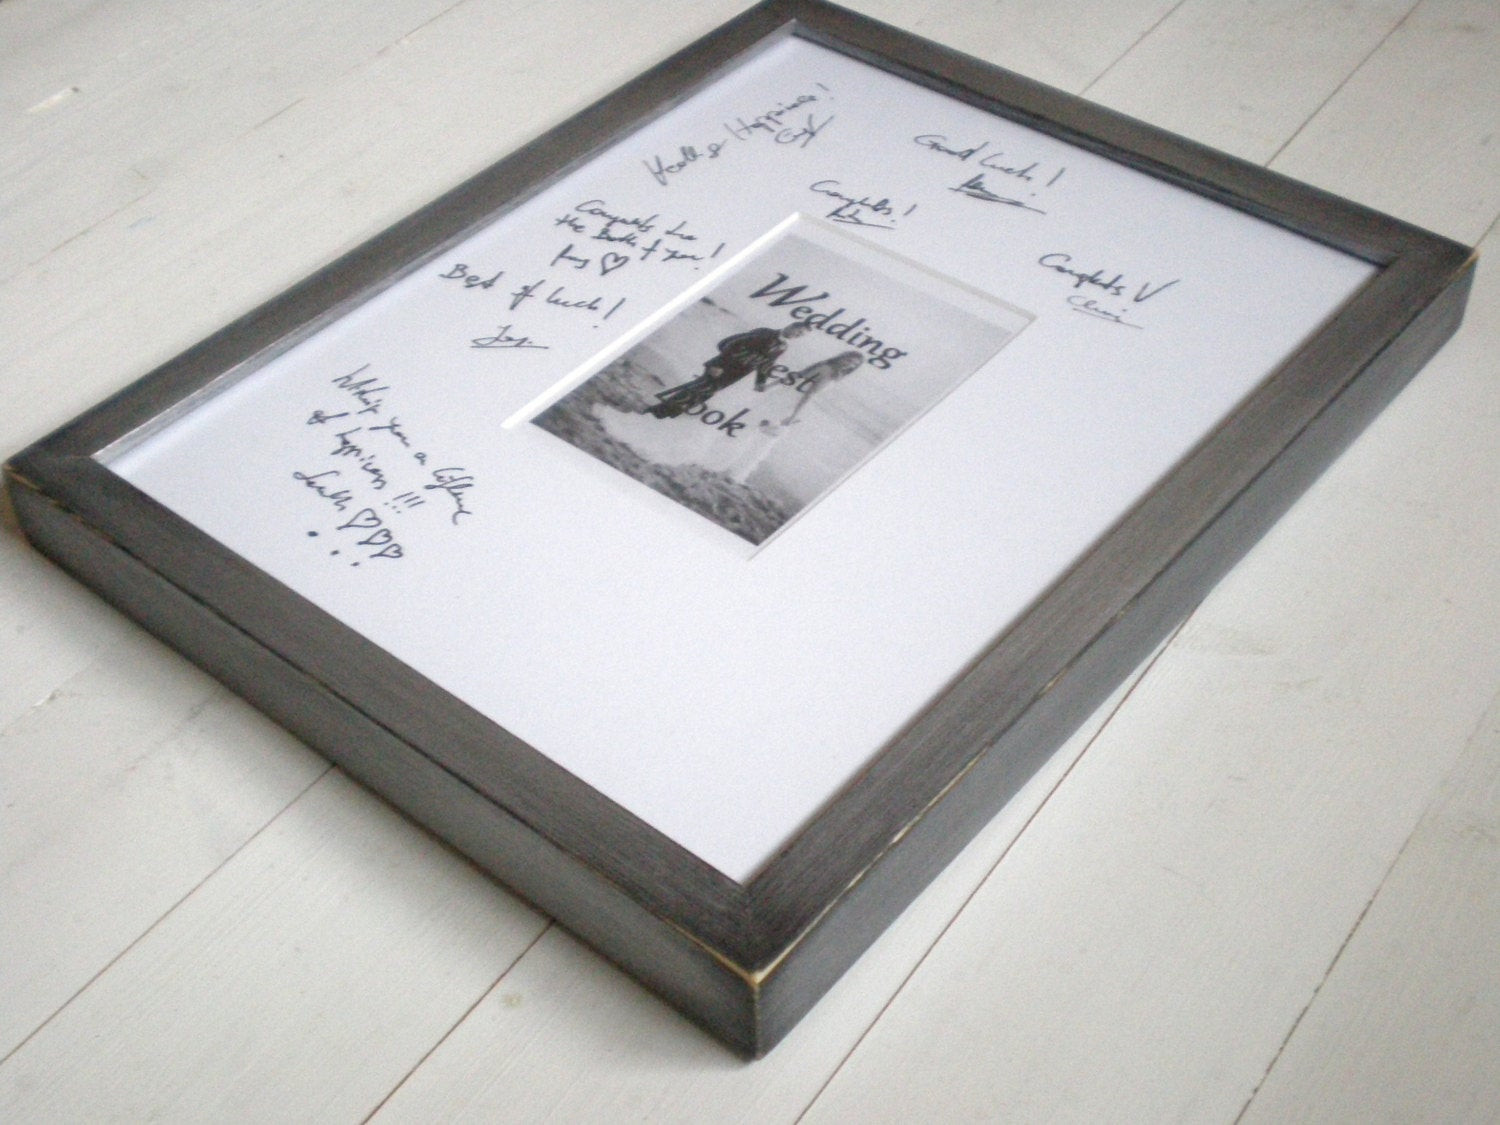 Wedding Guest Book Picture Frame
 Like this item